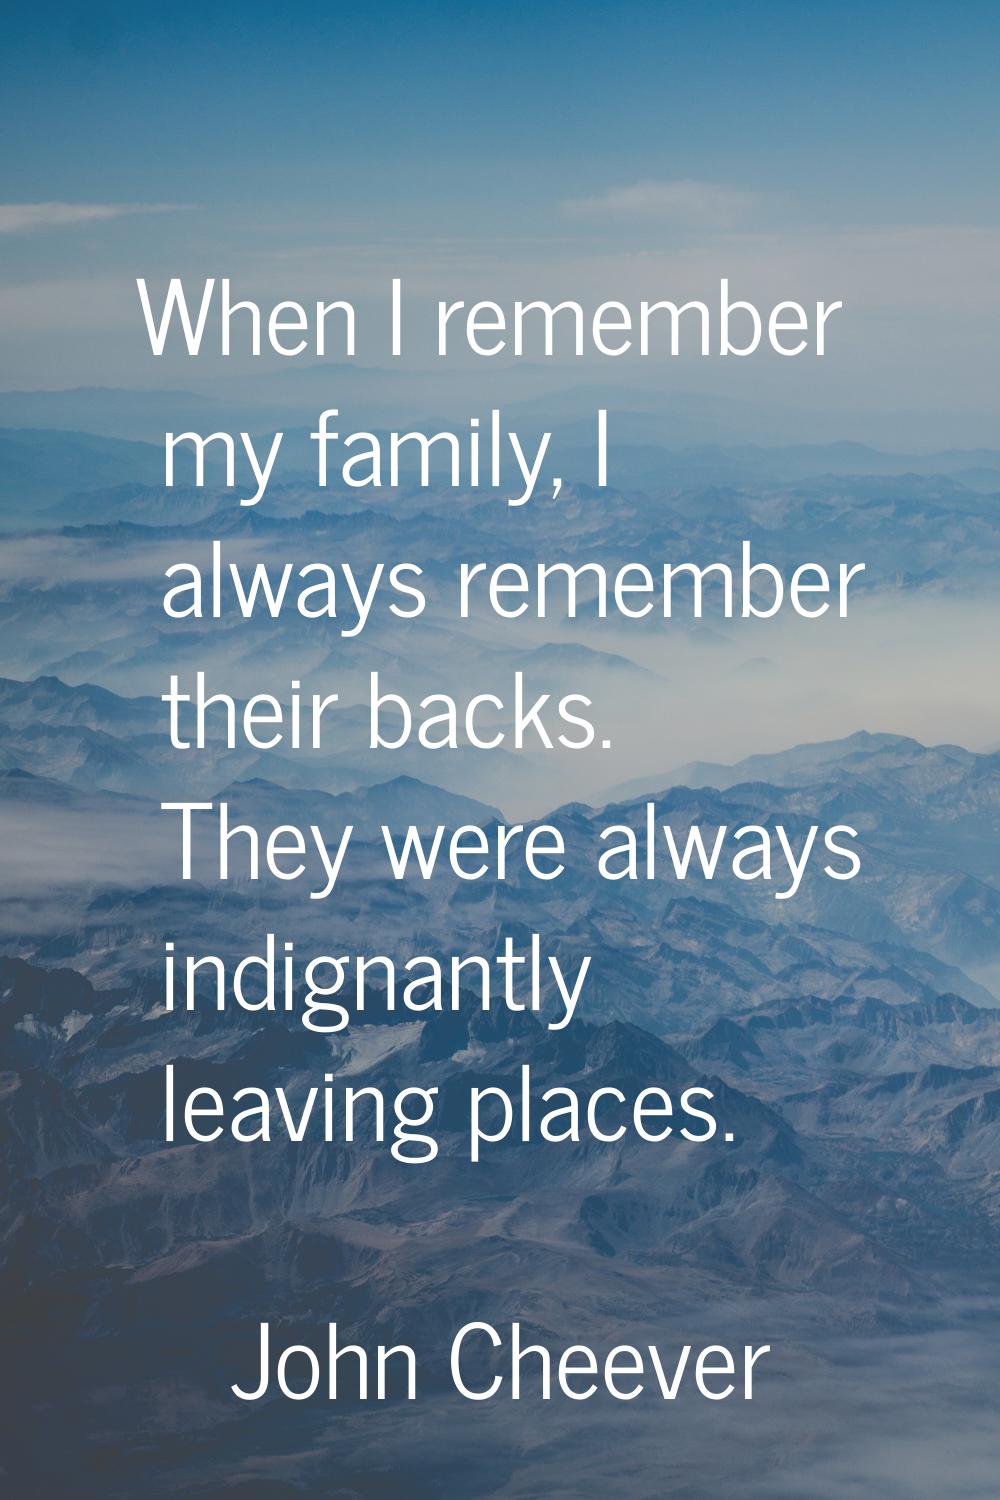 When I remember my family, I always remember their backs. They were always indignantly leaving plac